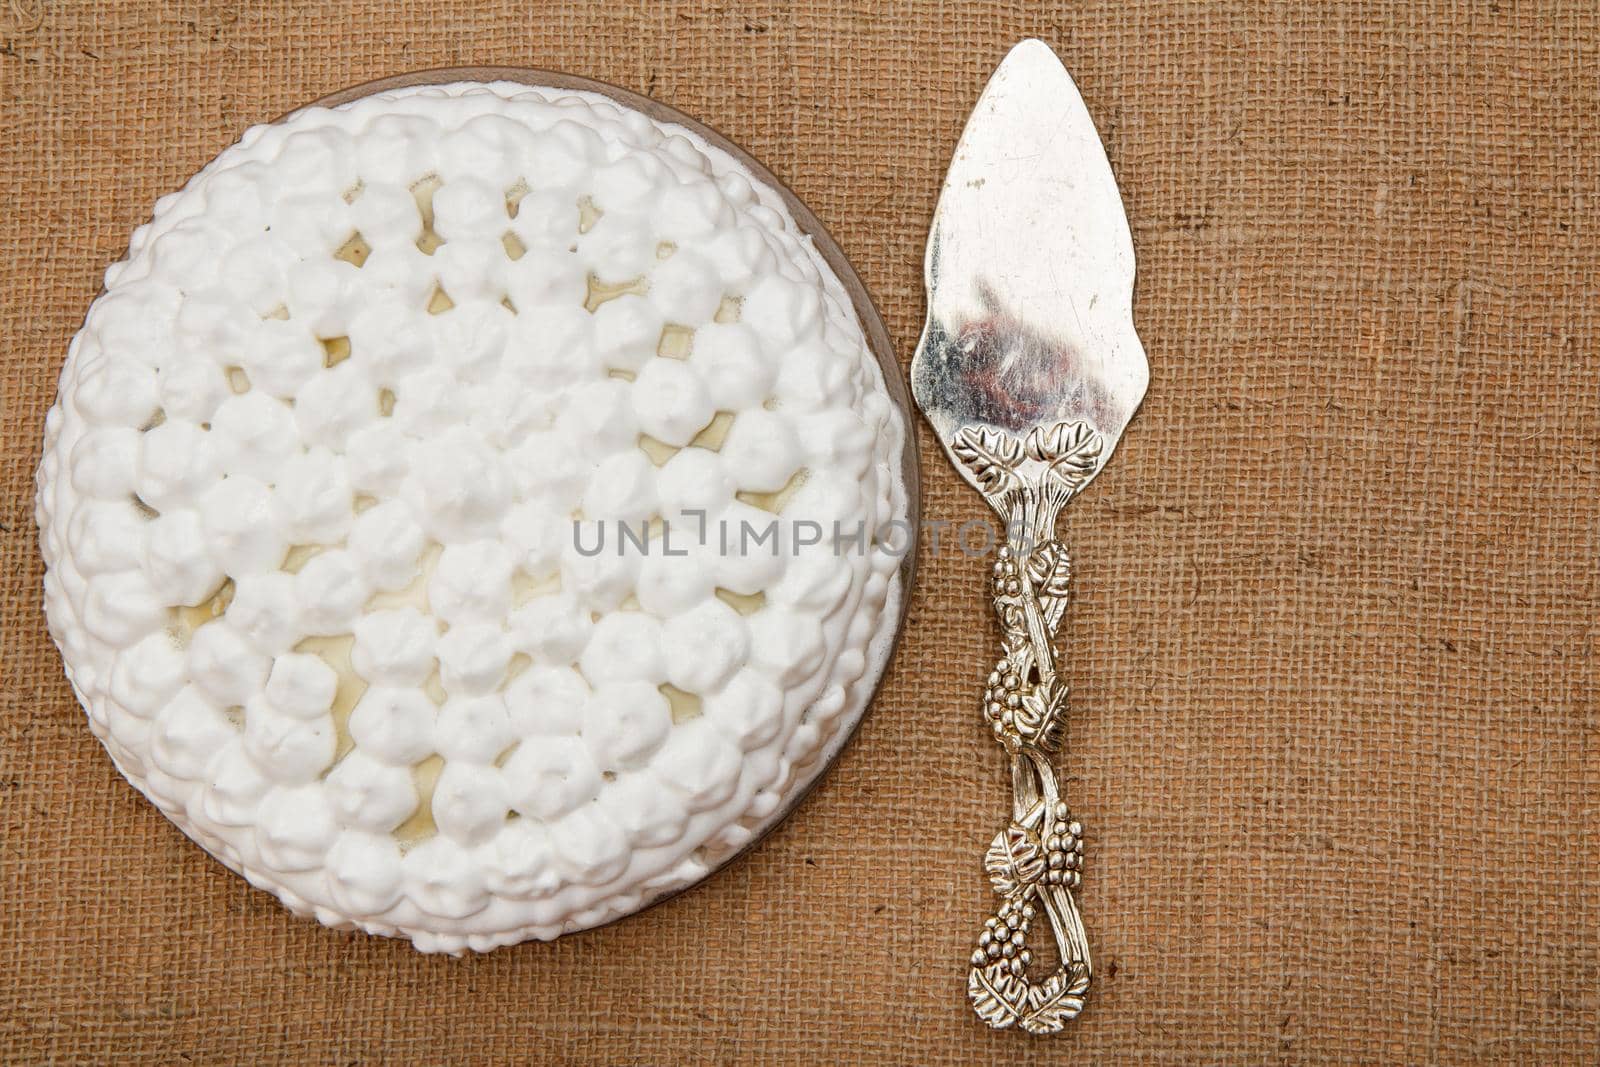 Biscuit cake decorated with whipped cream and silver cake lifter beside it on table with sackcloth. Top view with copy space